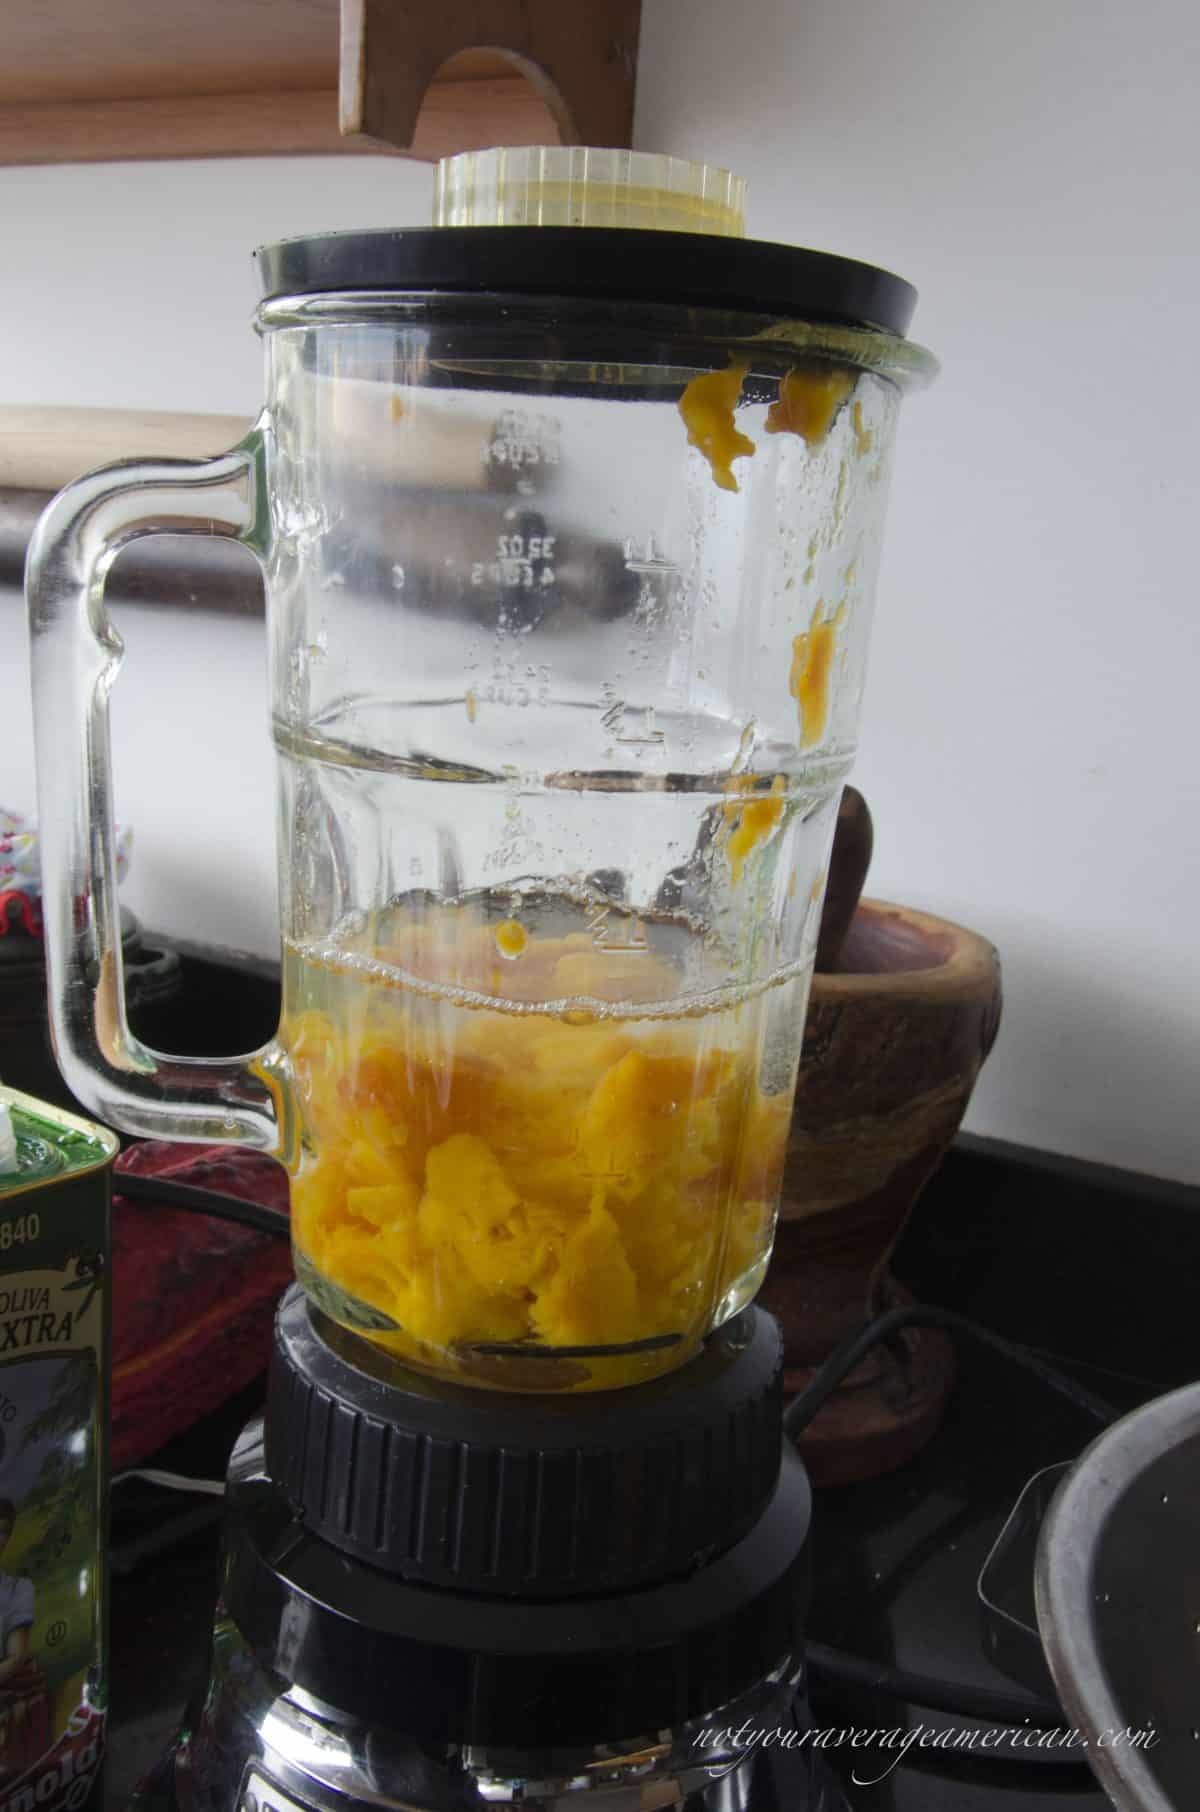 Tree Tomatoes and Water in Blender, Ecuadorian Hot Sauce with Ginger